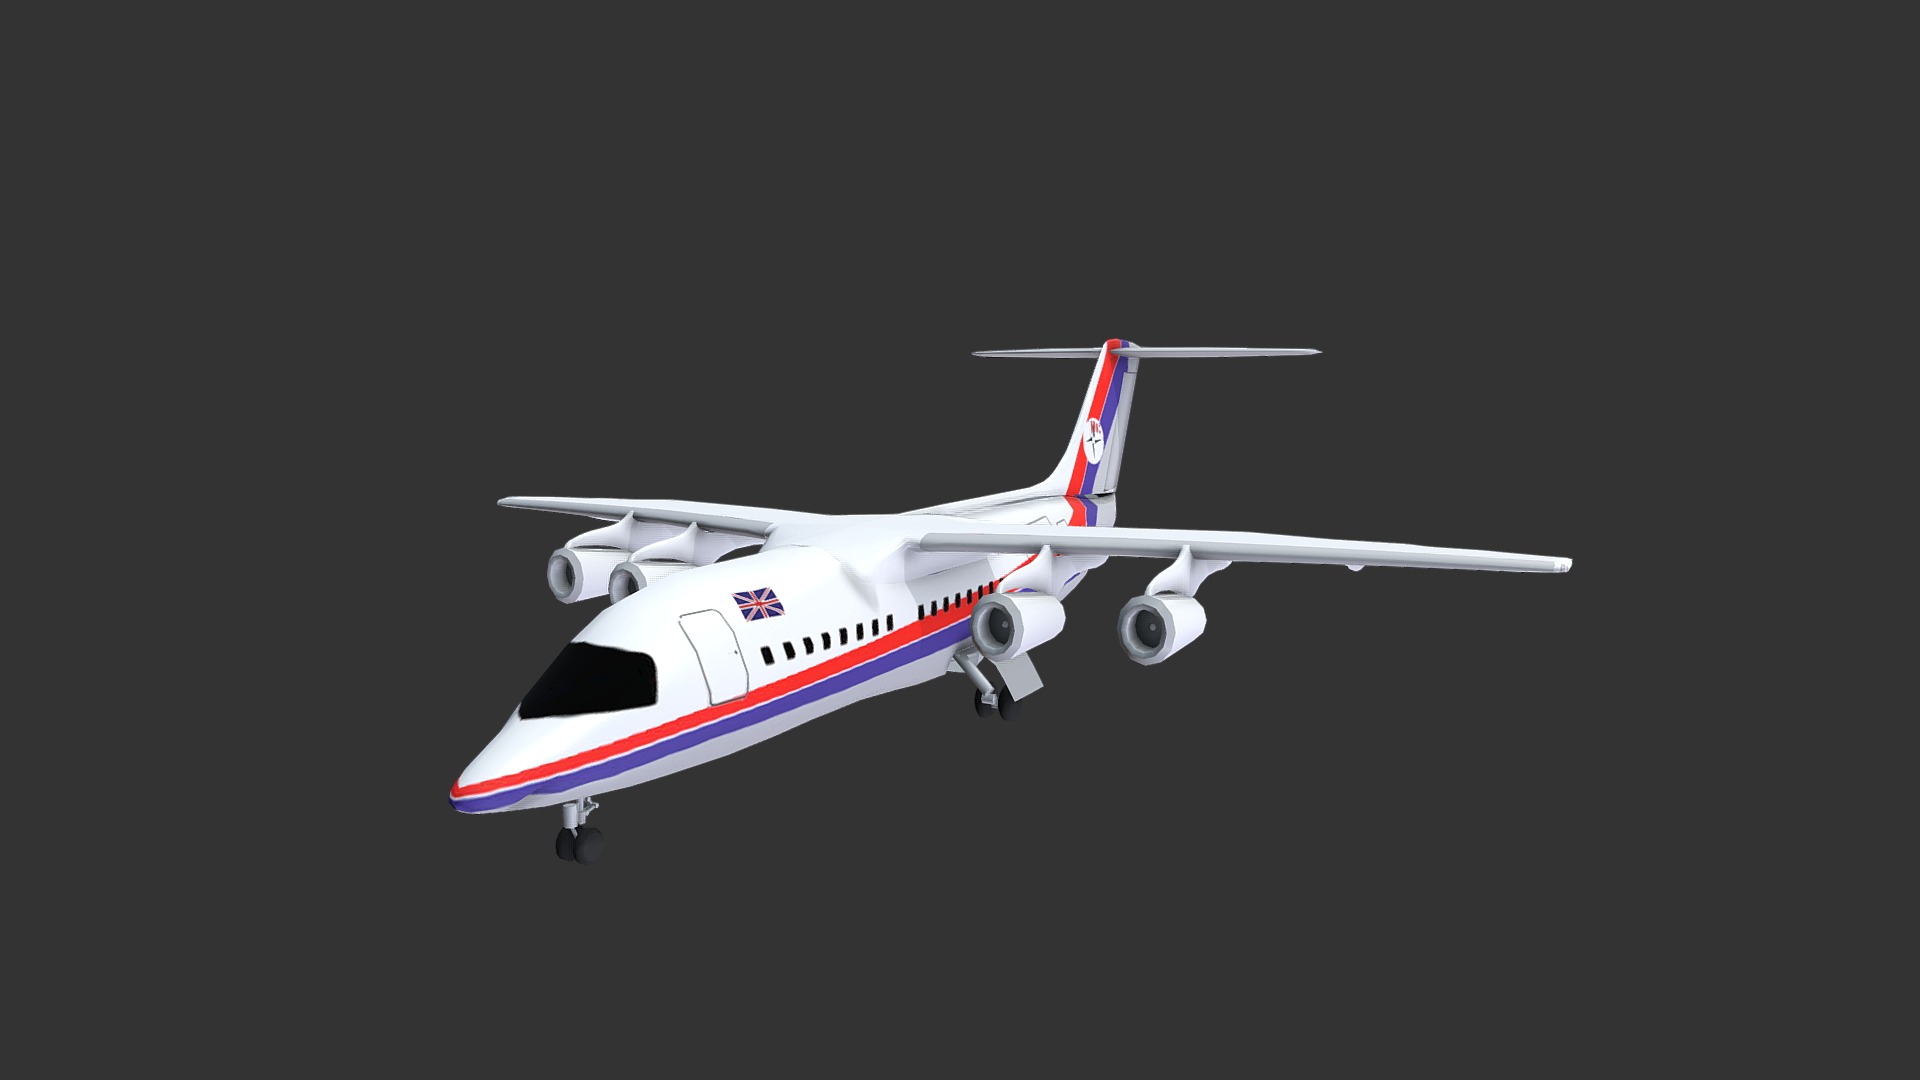 3D model B146 - This is a 3D model of the B146. The 3D model is about a white and red airplane.